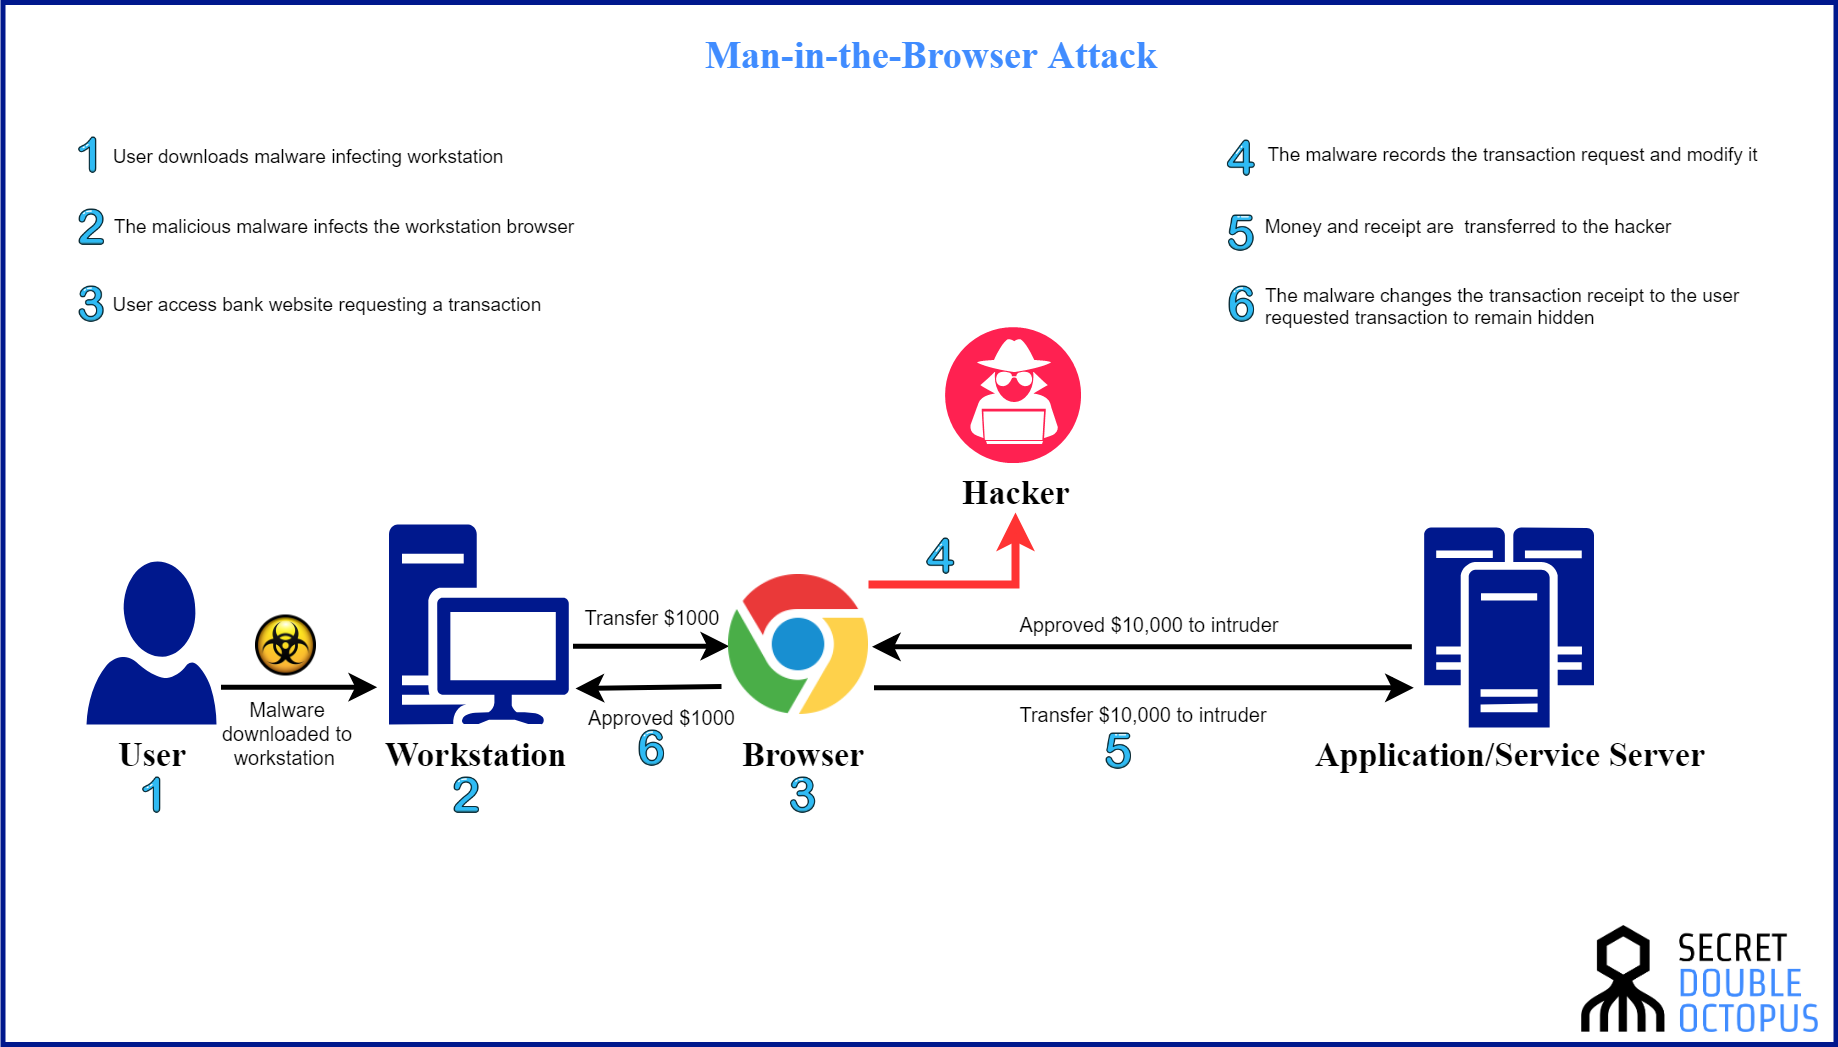 Man in the browser attack schema - secret double octopus